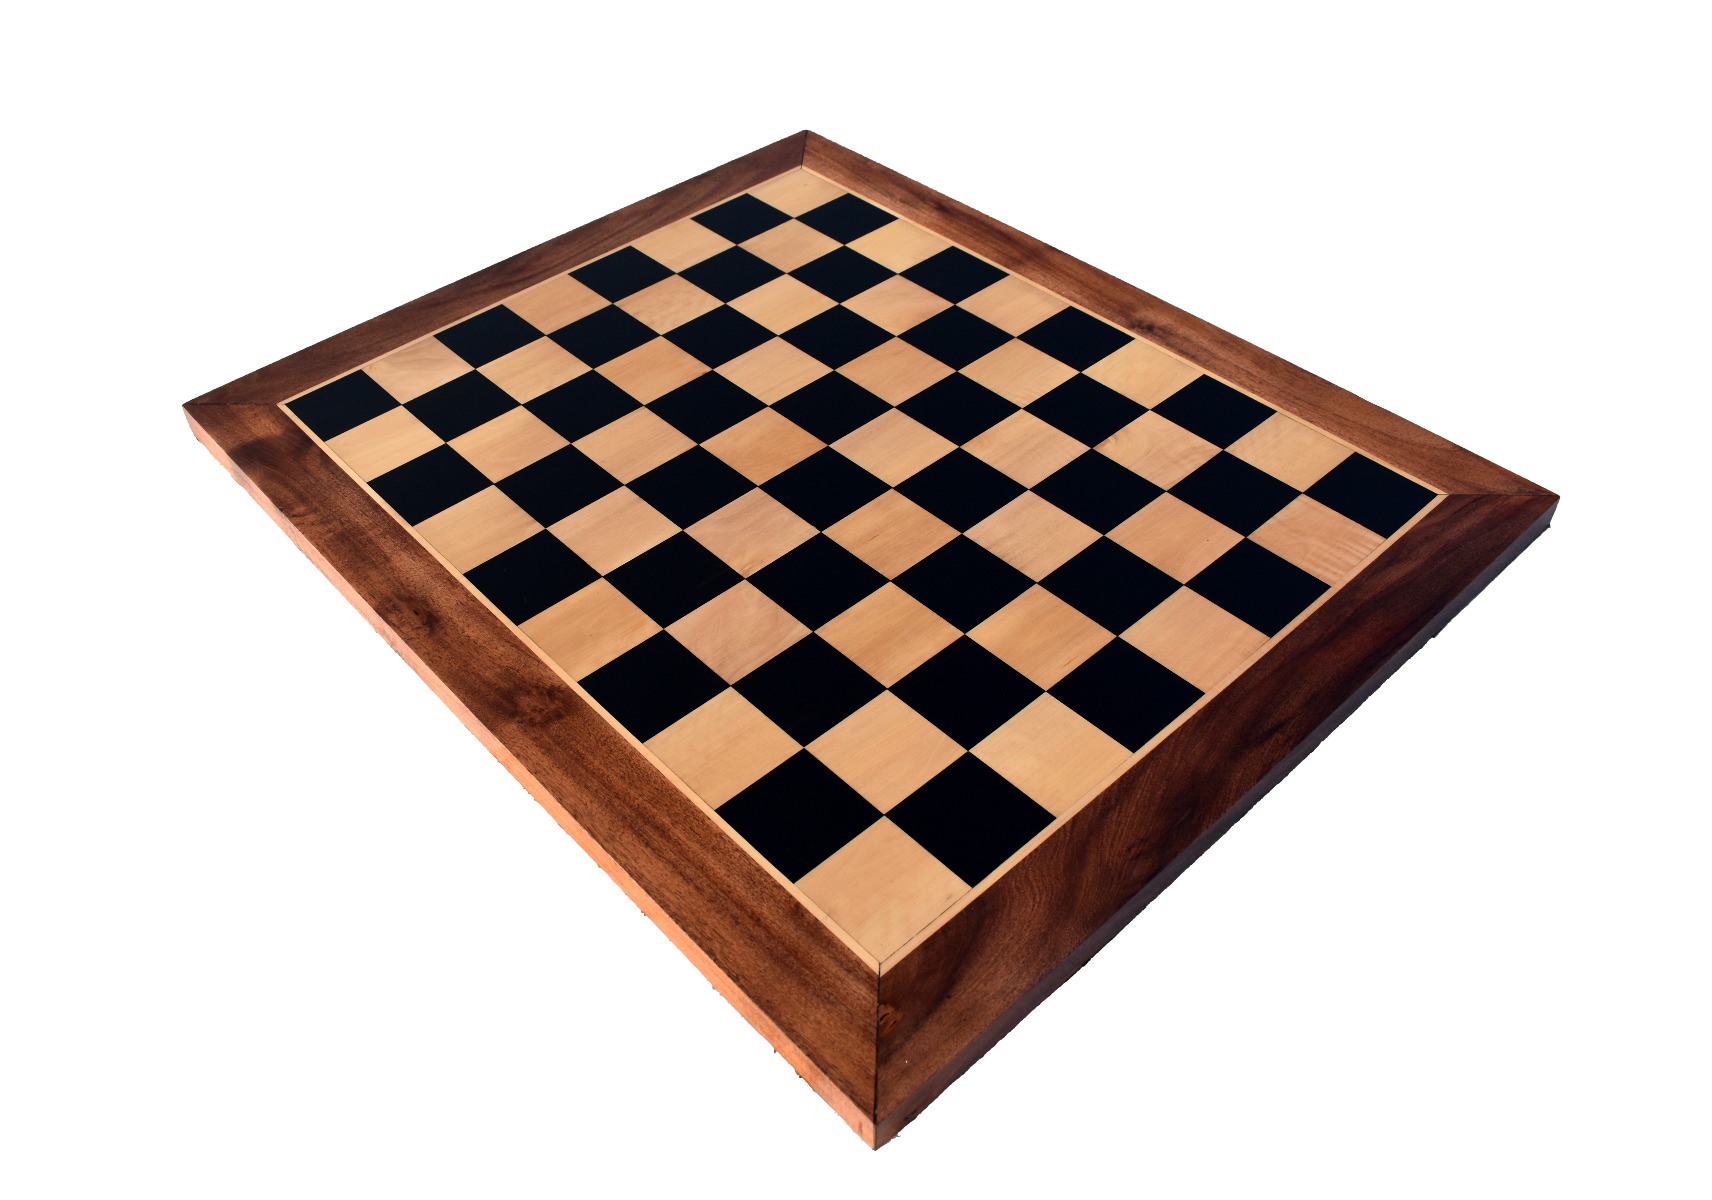 Capablanca Burmese Rosewood Edition Wooden Tournament Chess Board